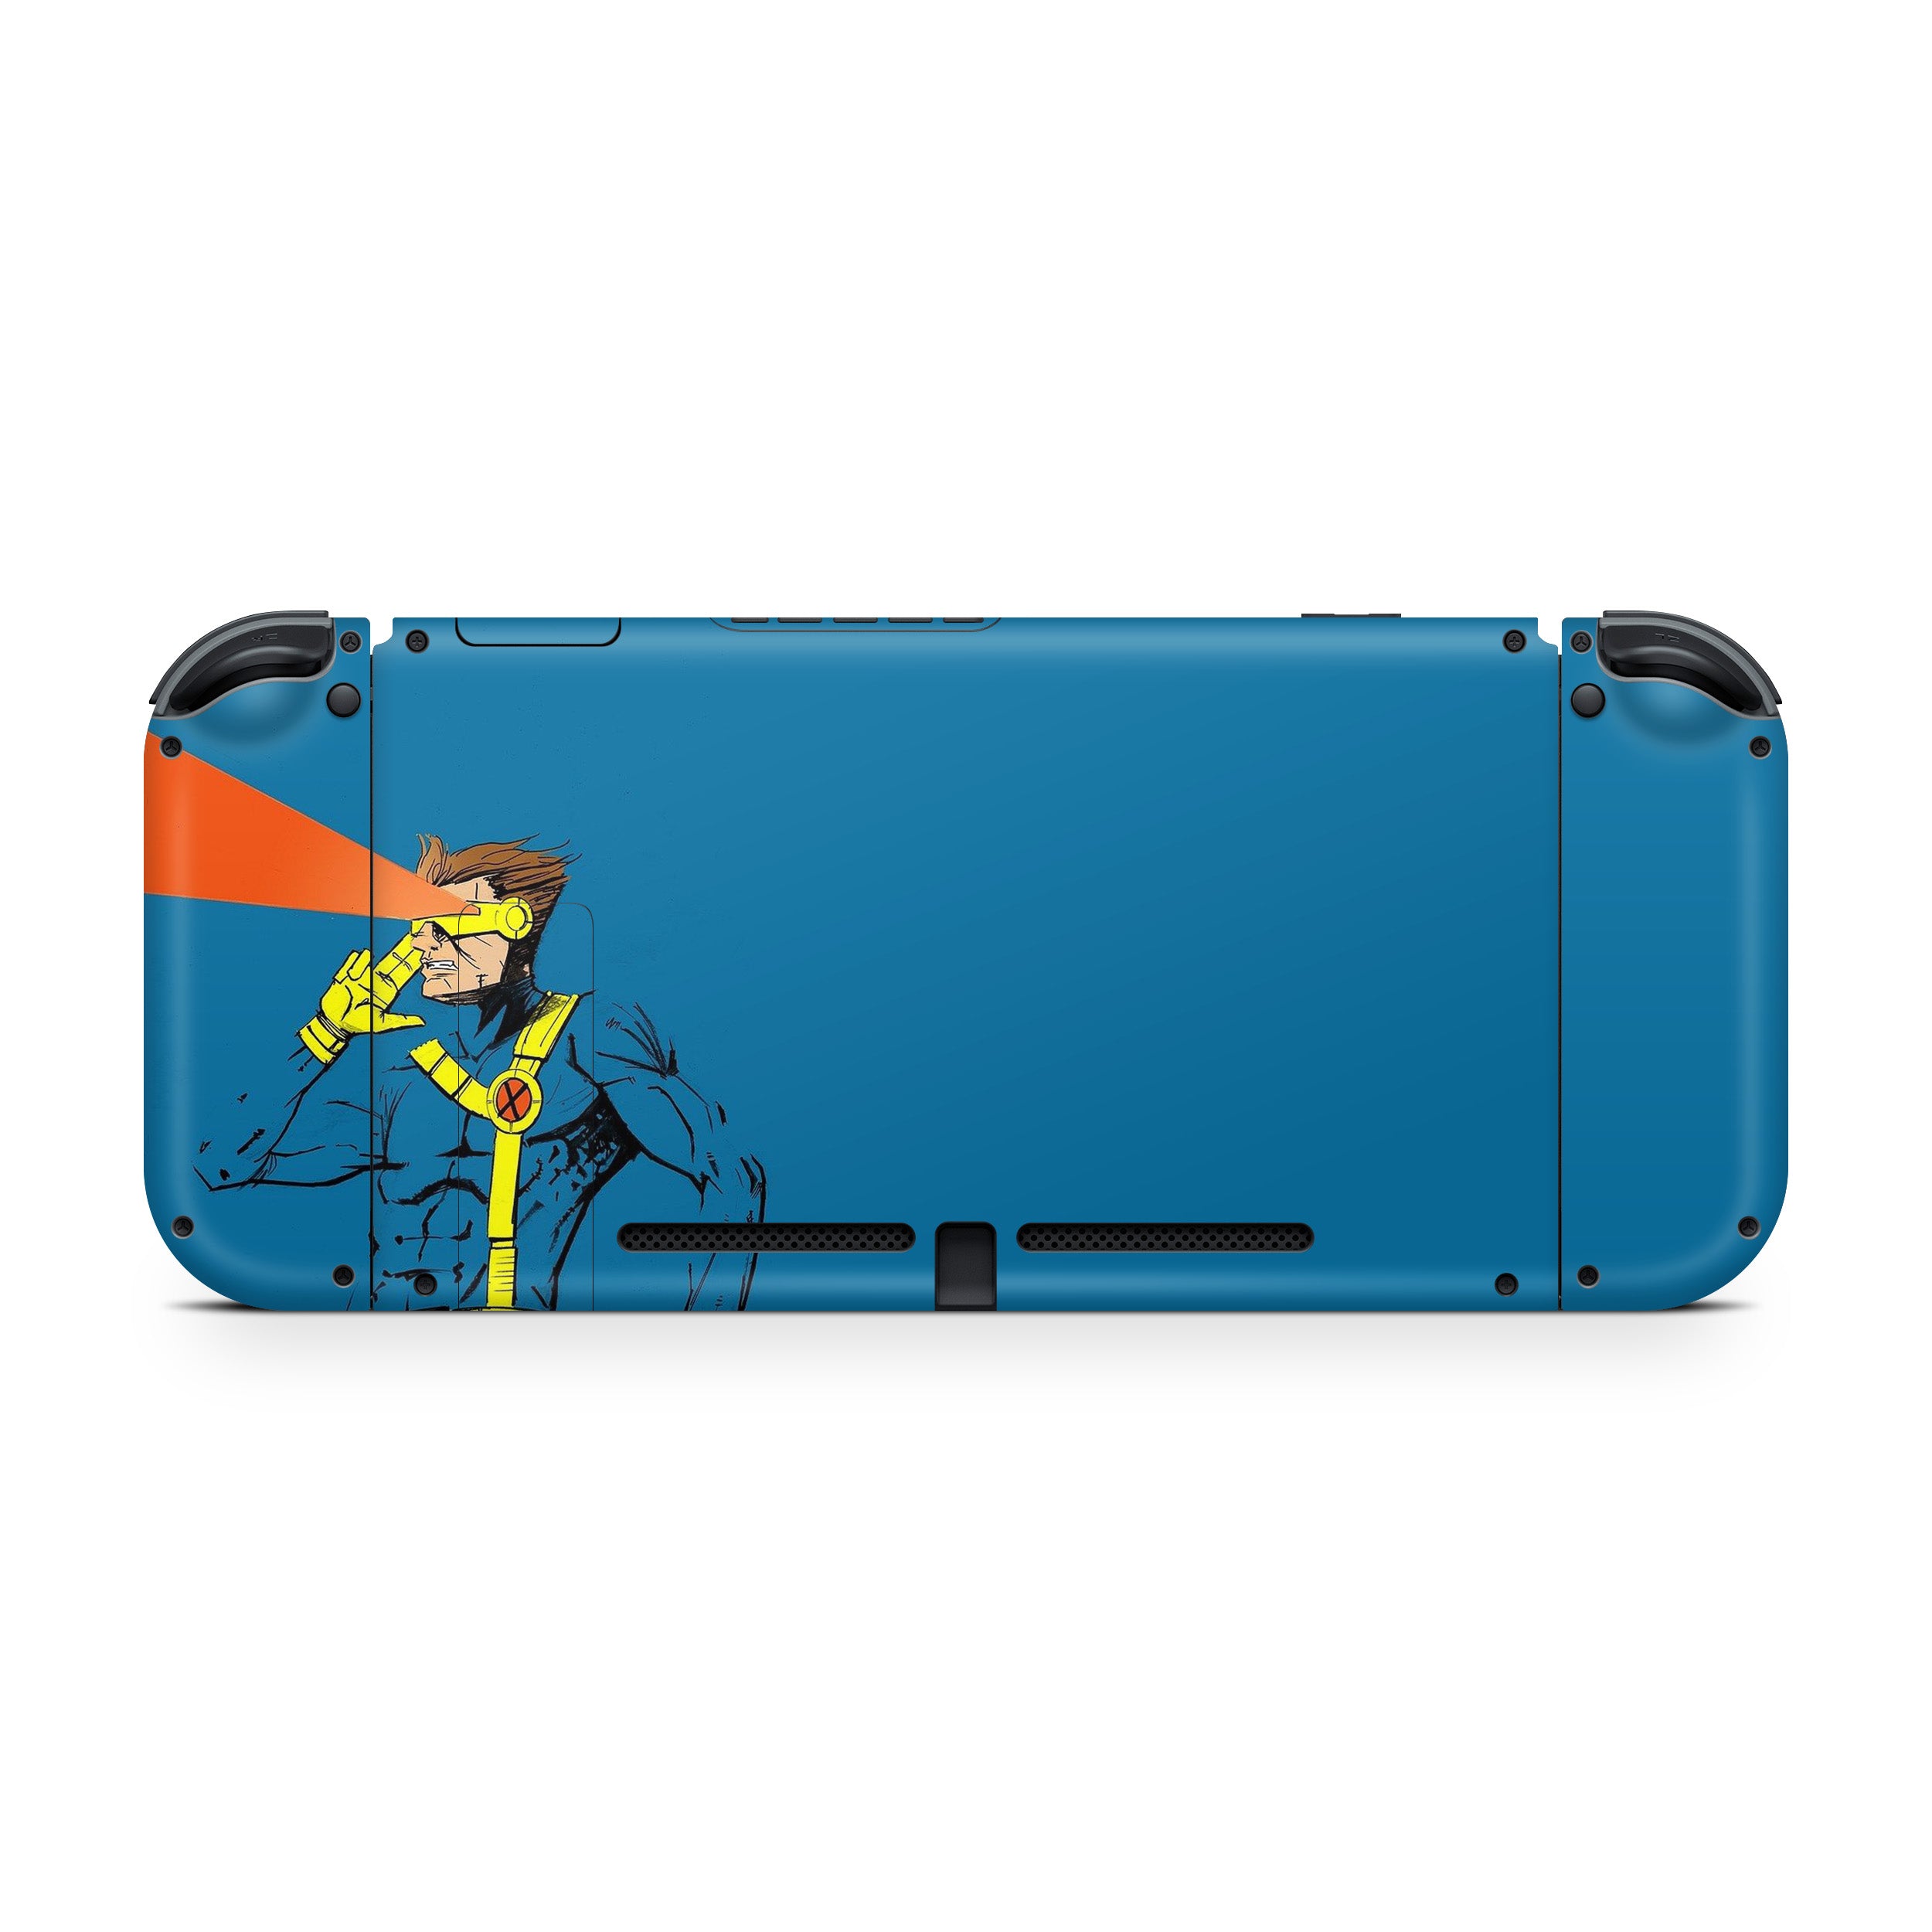 A video game skin featuring a Marvel X Men Cyclops design for the Nintendo Switch.